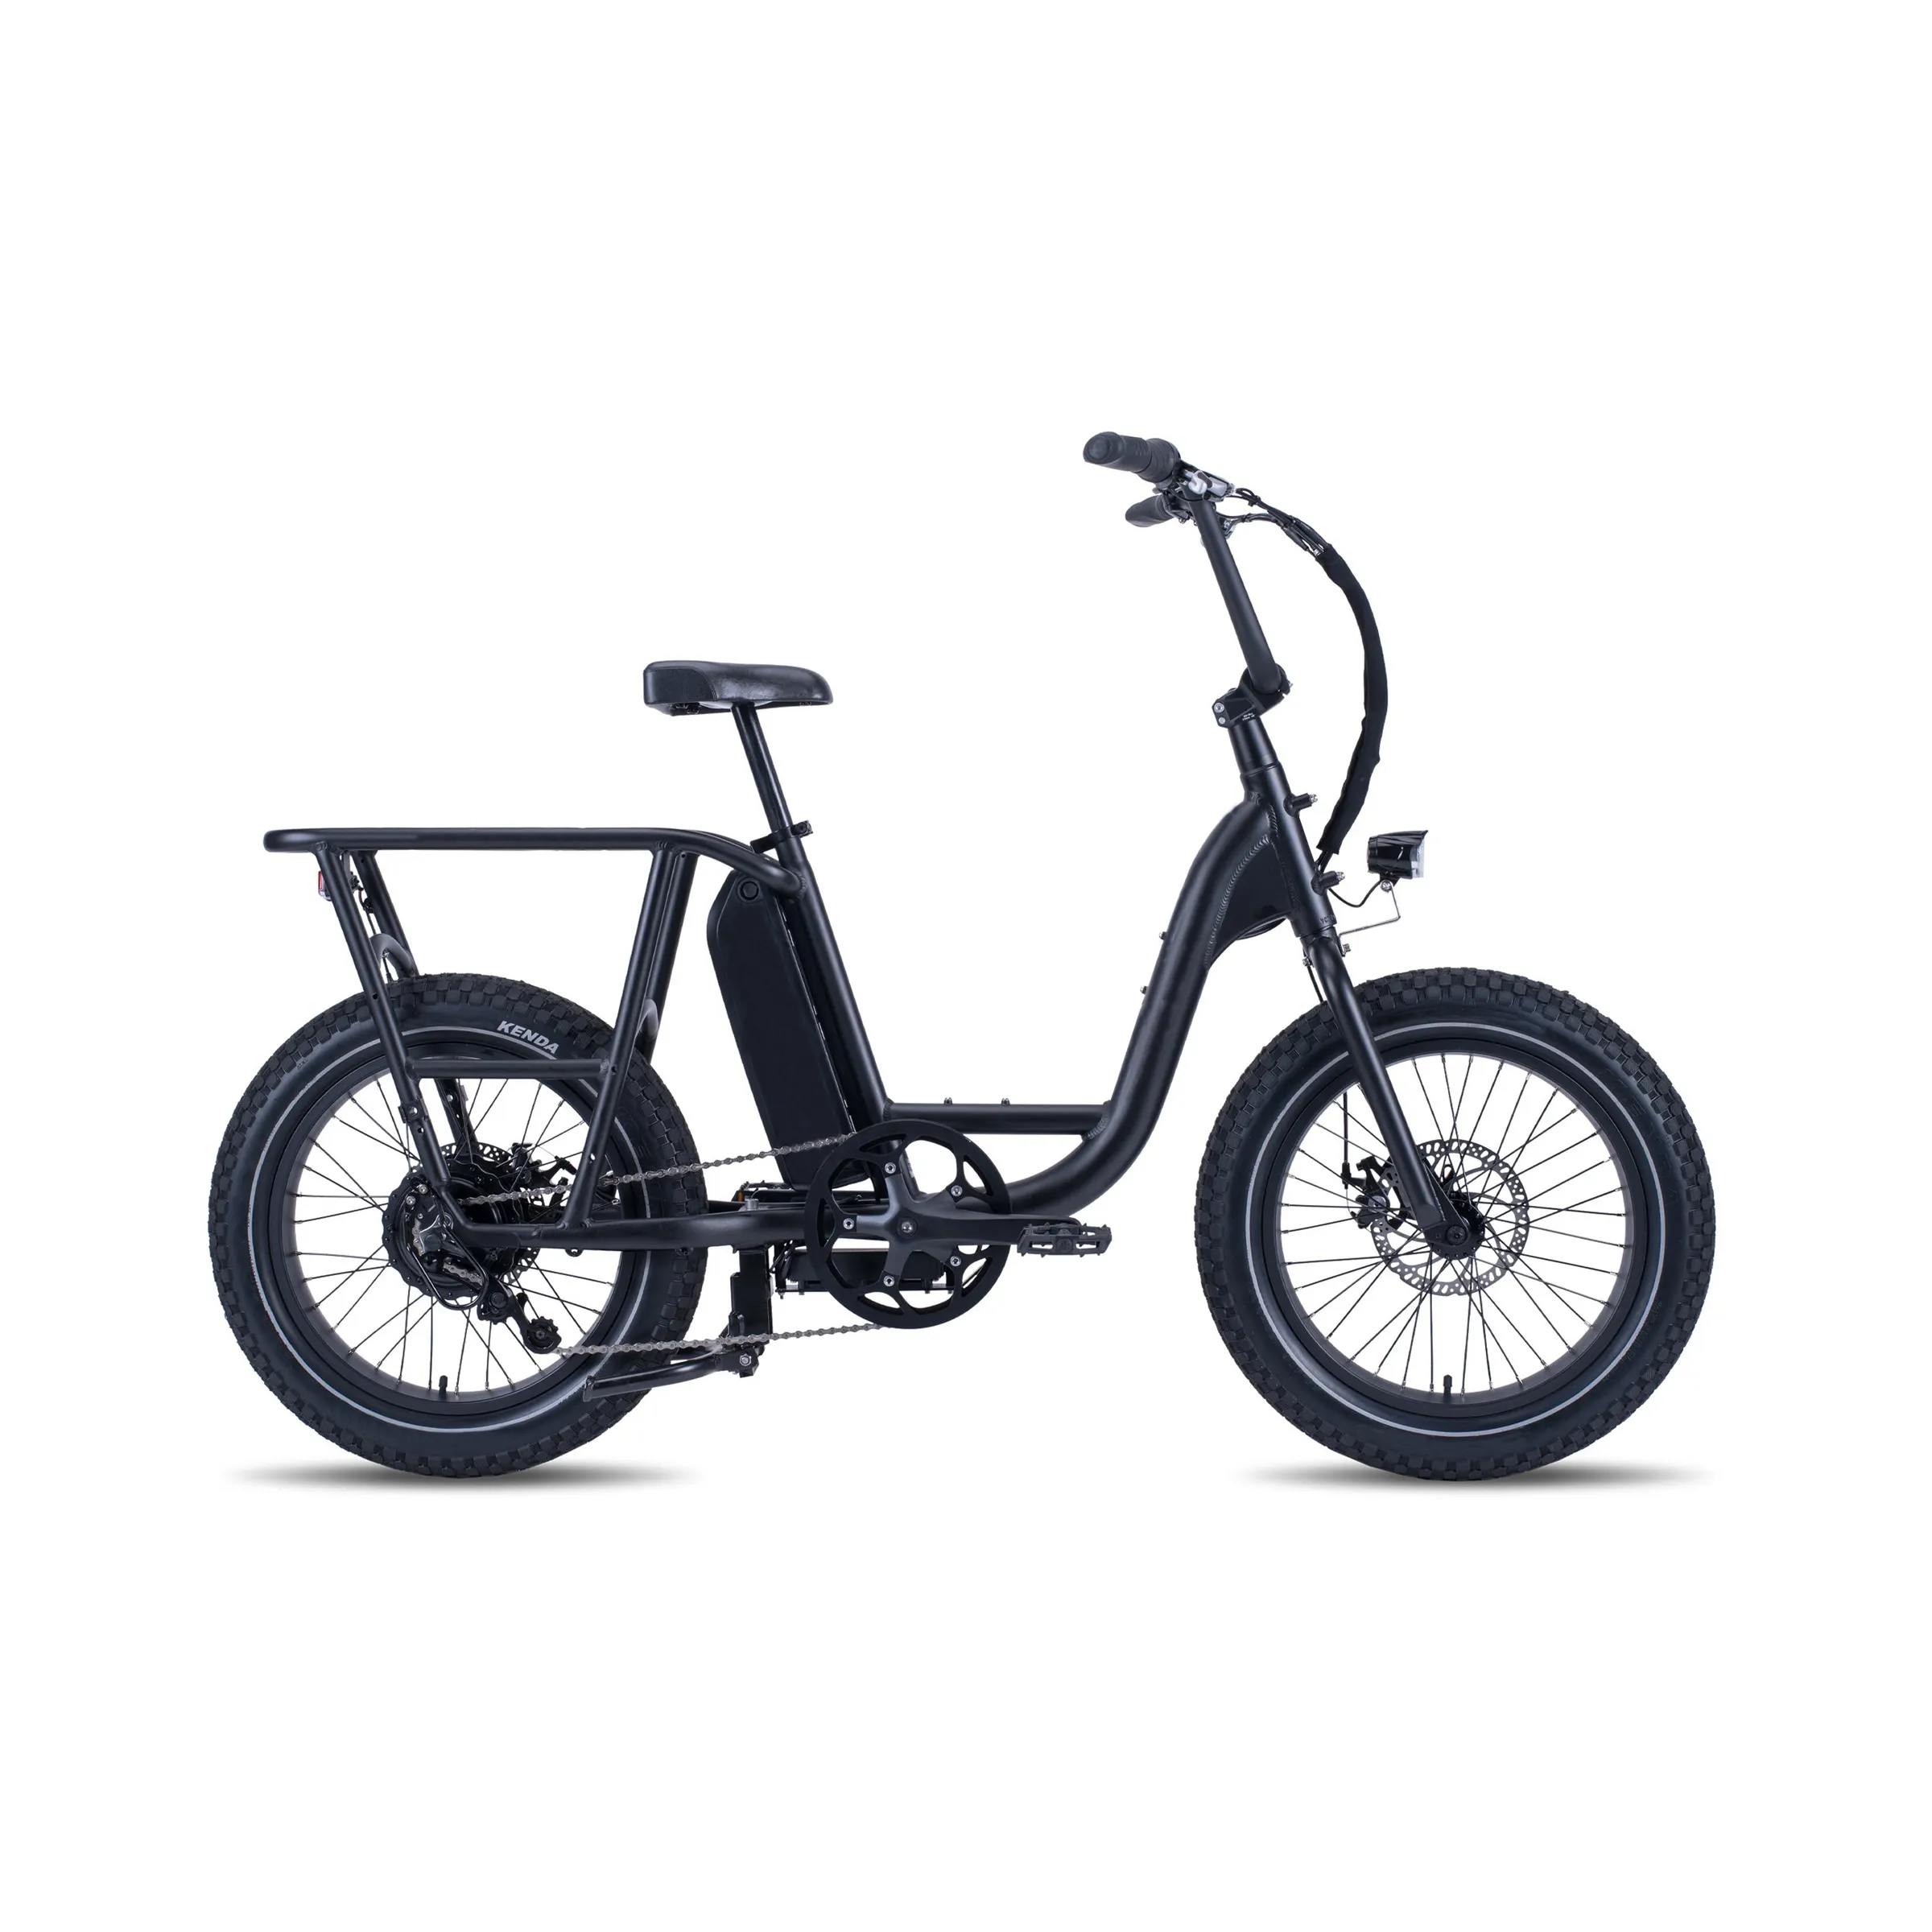 Greenpedel aluminum alloy frame 750w brushless motor fat tire electric bike bicycle